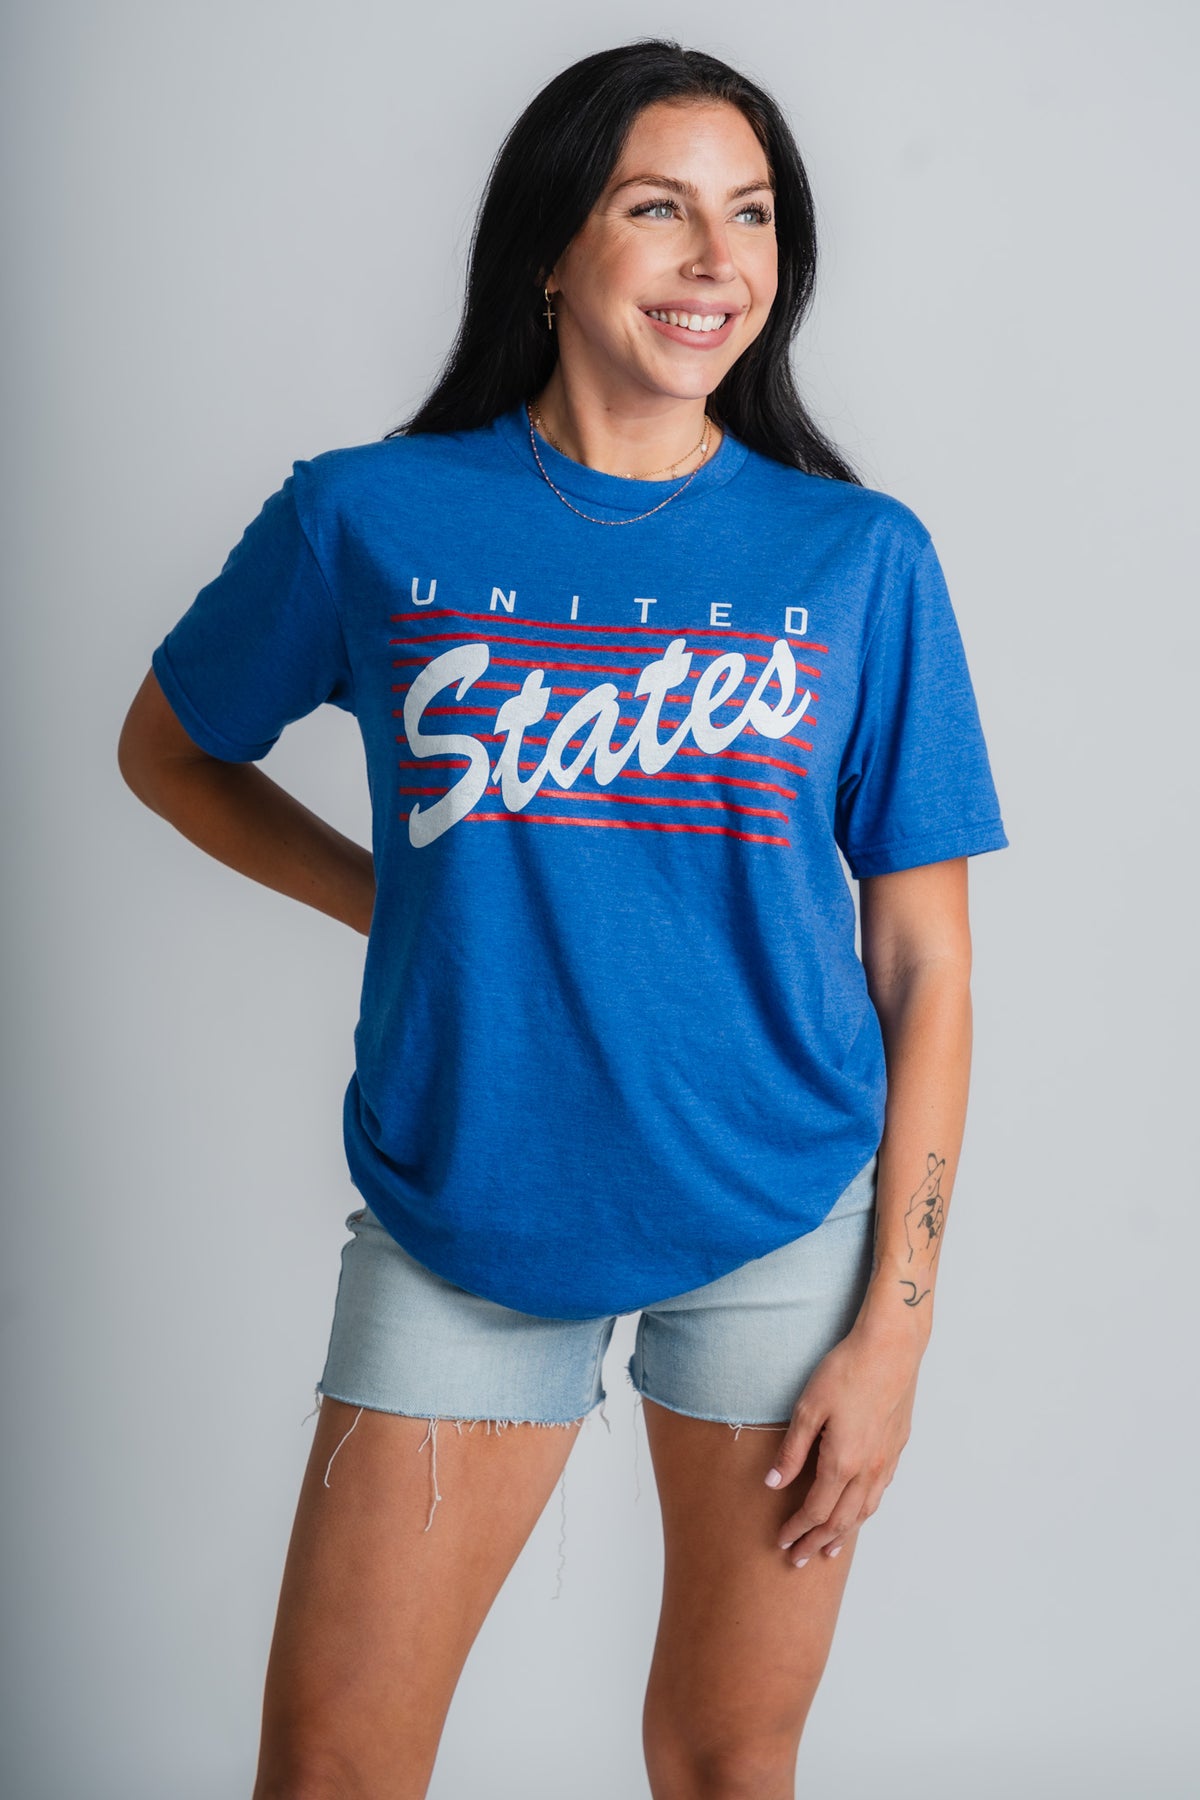 USA lines unisex t-shirt - Trendy T-shirts - Cute American Summer Collection at Lush Fashion Lounge Boutique in Oklahoma City